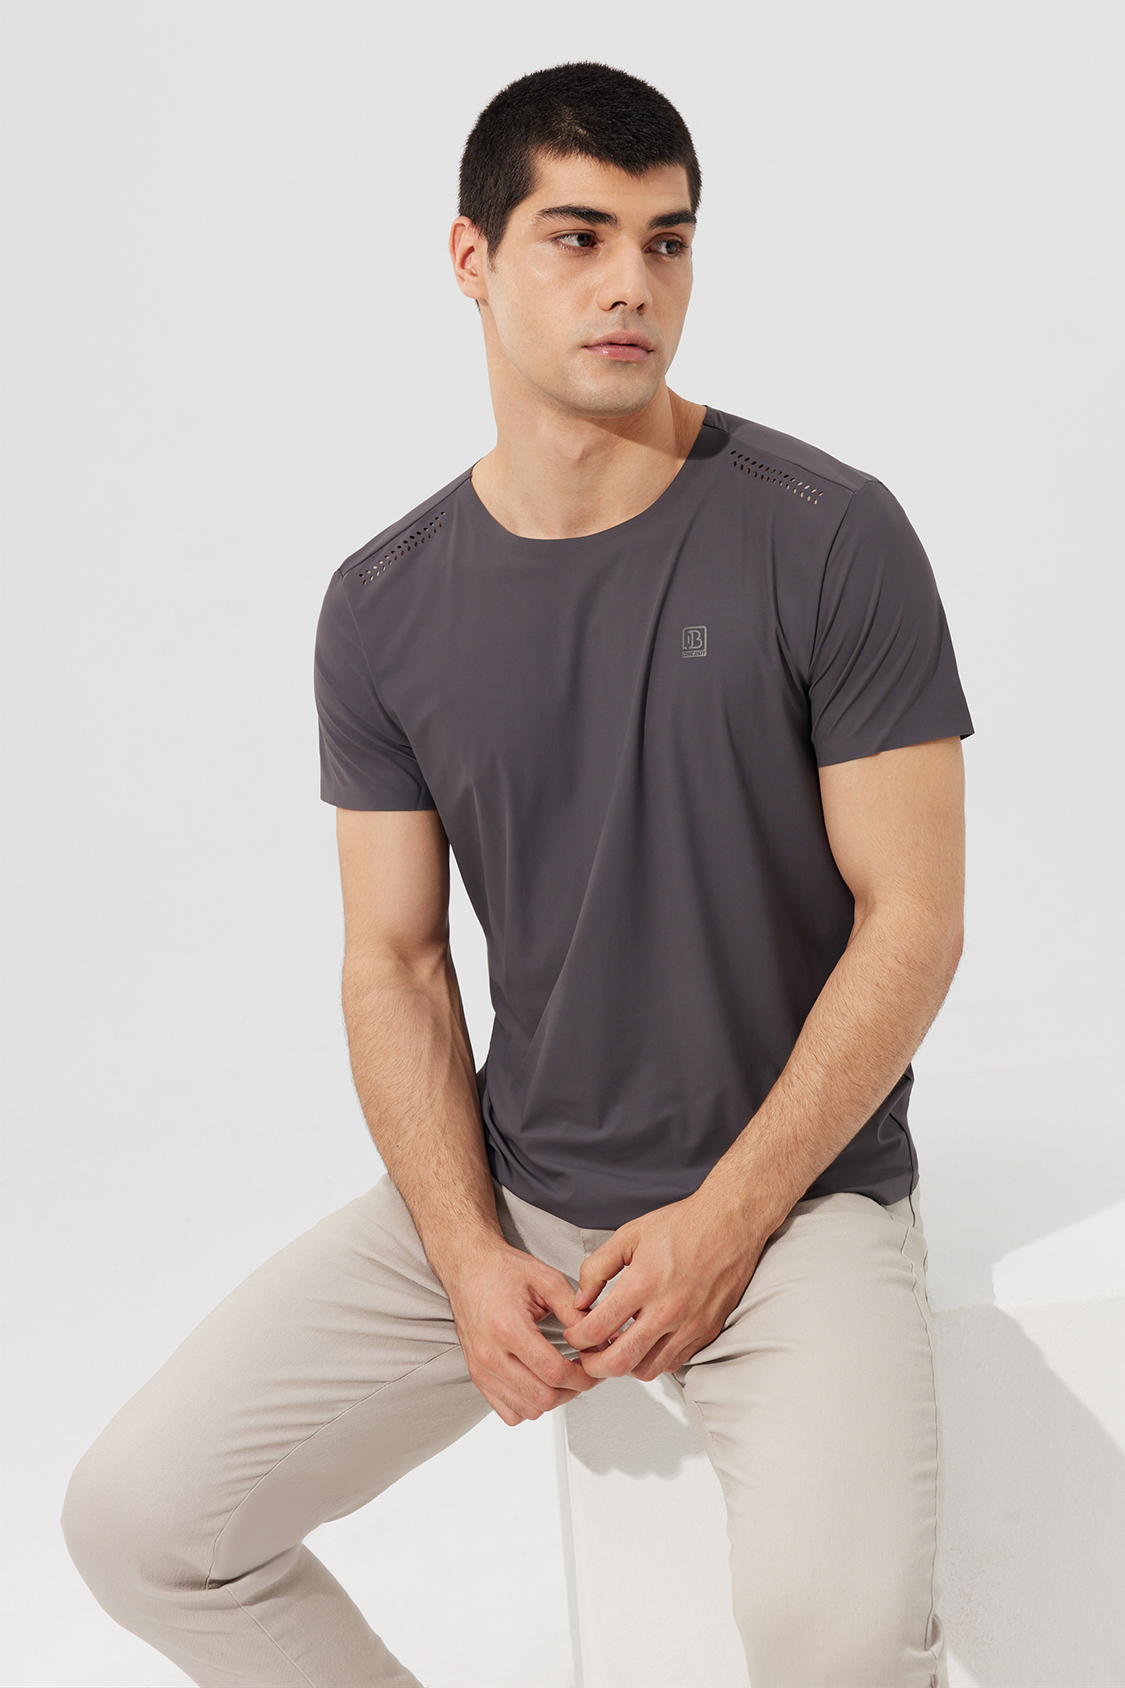 230311 Ice-Tech Premium Seamless Breathable Heat-Pressed T-Shirt For Men